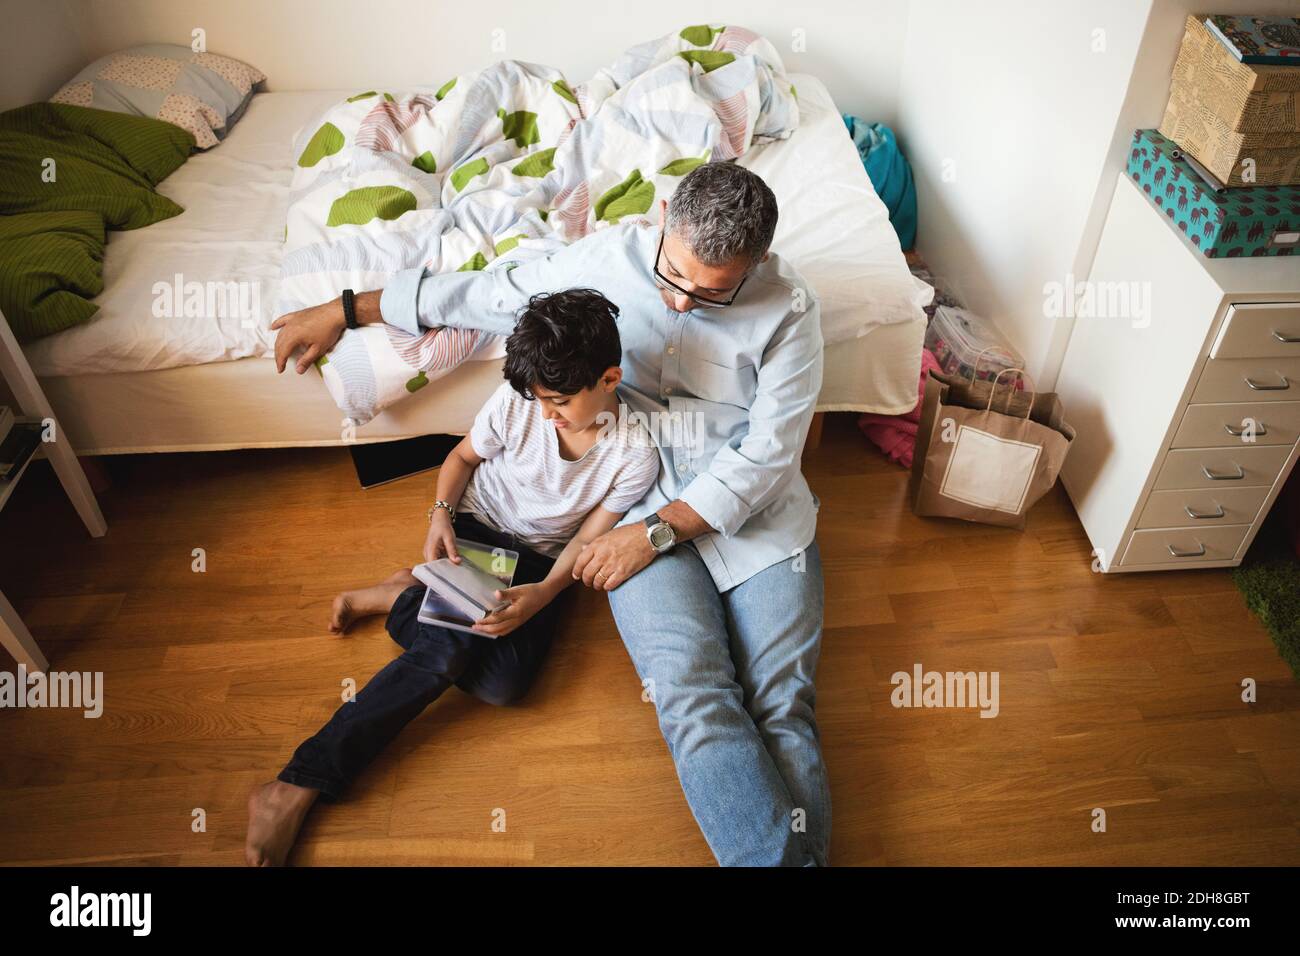 High angle view of father and son reading book while sitting on hardwood floor in bedroom Stock Photo